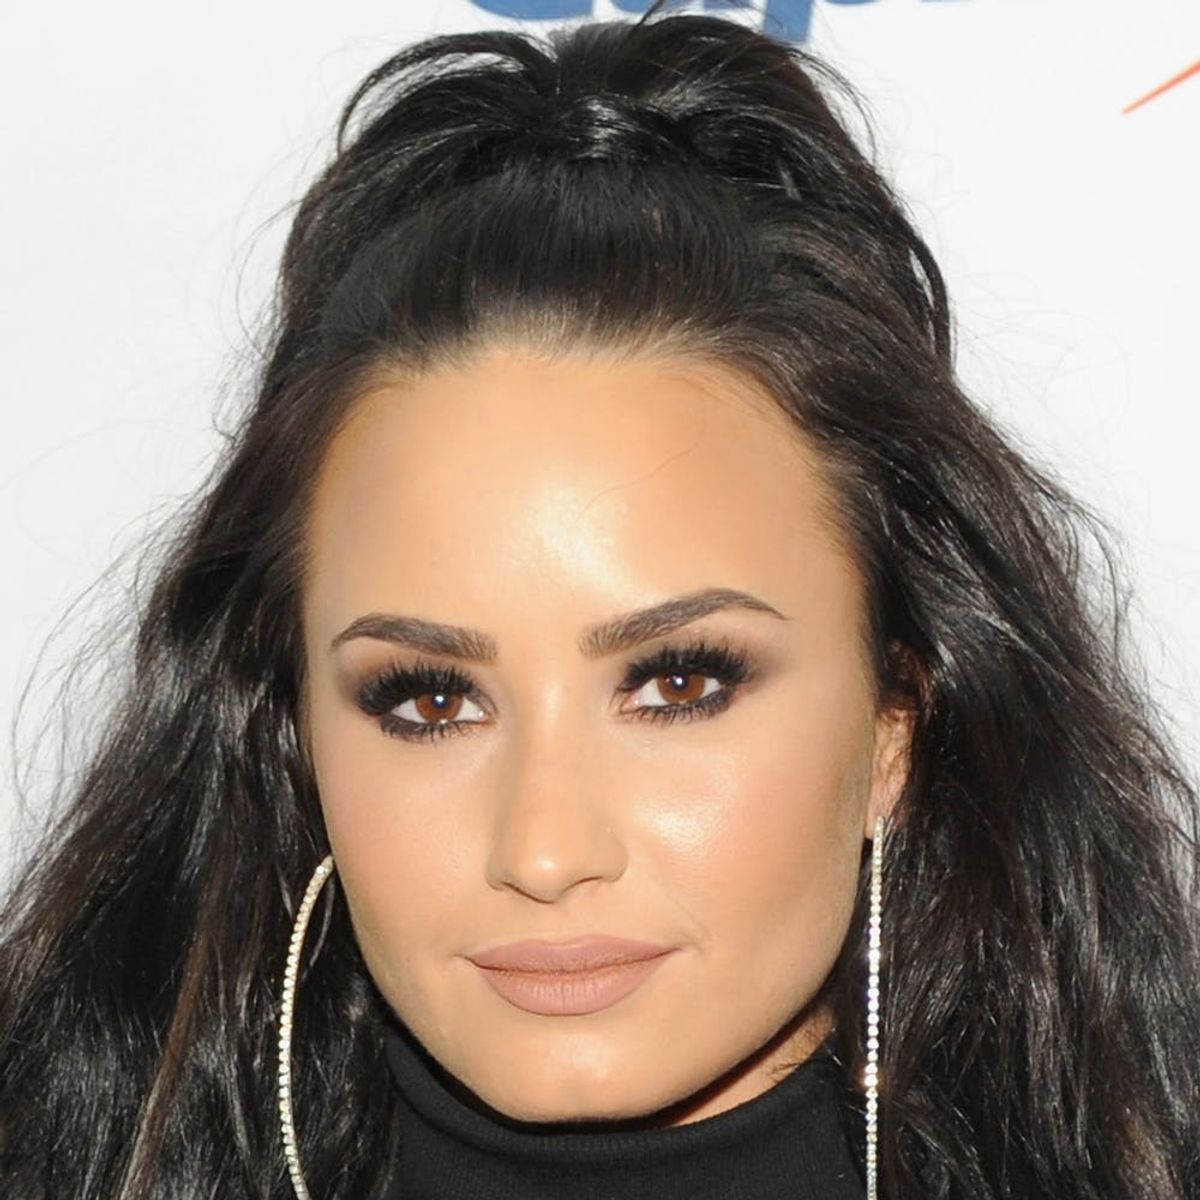 Demi Lovato Got Real About How She Feels in a Swimsuit With a Post Worth Applauding